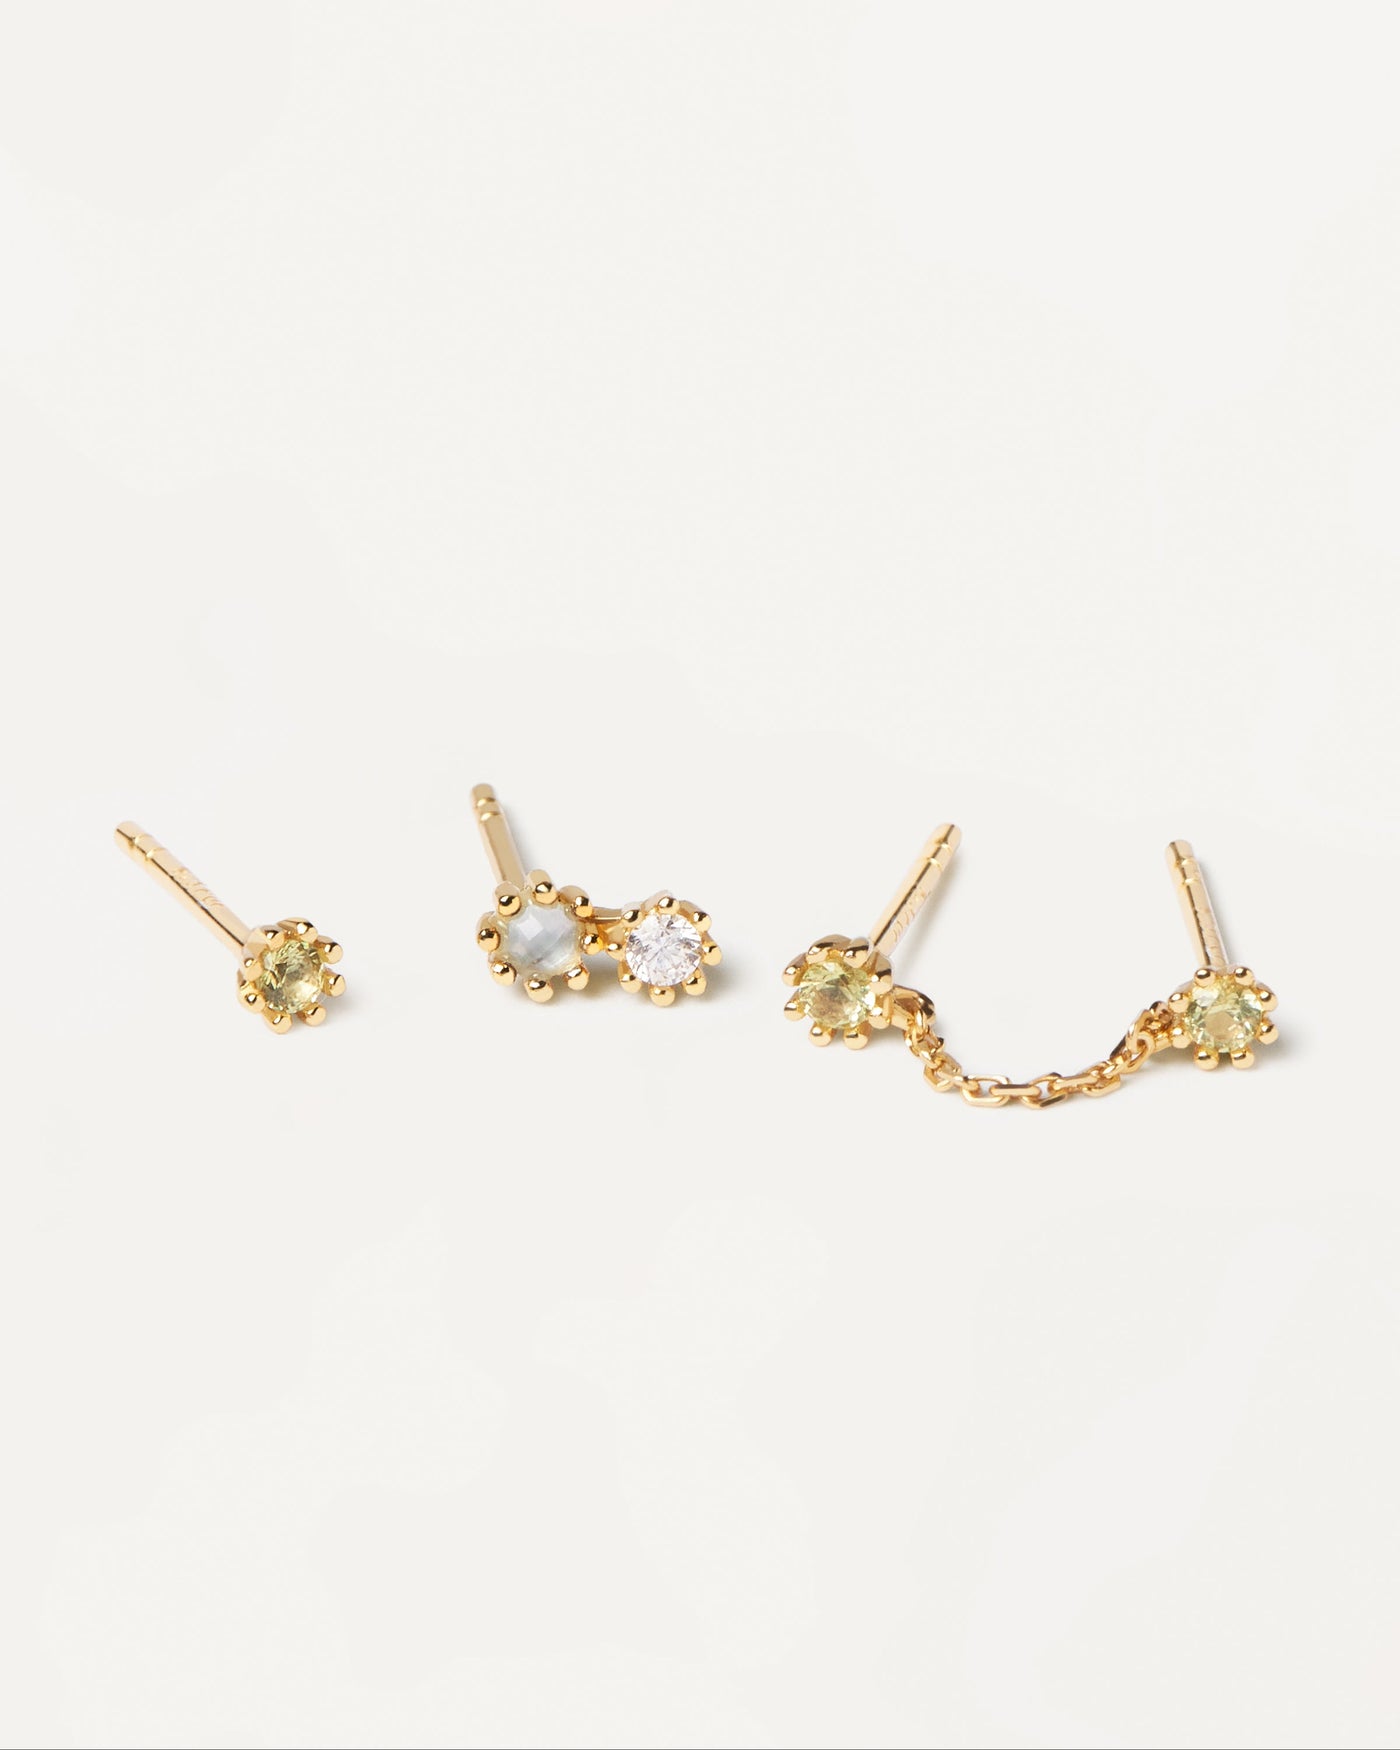 2023 Selection | Kara Earrings Set. Set of 3 earrings in gold-plated silver with zirconia: two single & one double stud earring. Get the latest arrival from PDPAOLA. Place your order safely and get this Best Seller. Free Shipping.